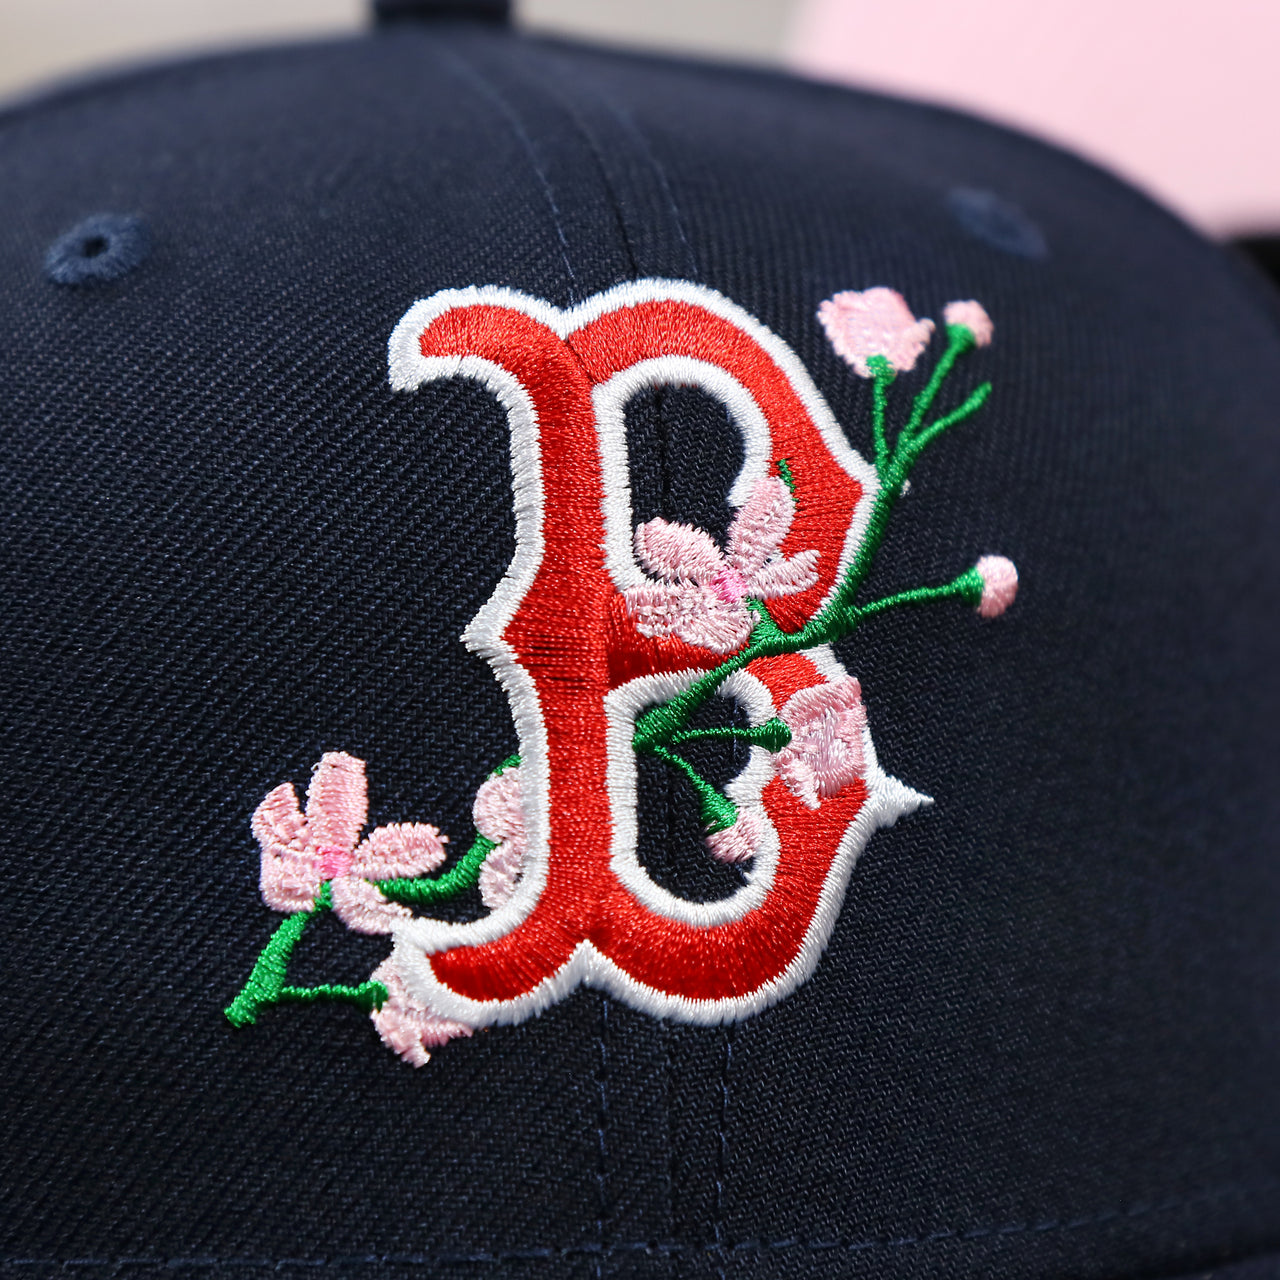 The Red Sox Sakura Logo on the Boston Red Sox Pink Undervisor Sakura Tree Embroidered 59Fifty Fitted Cap | Navy Blue 59Fifty Cap